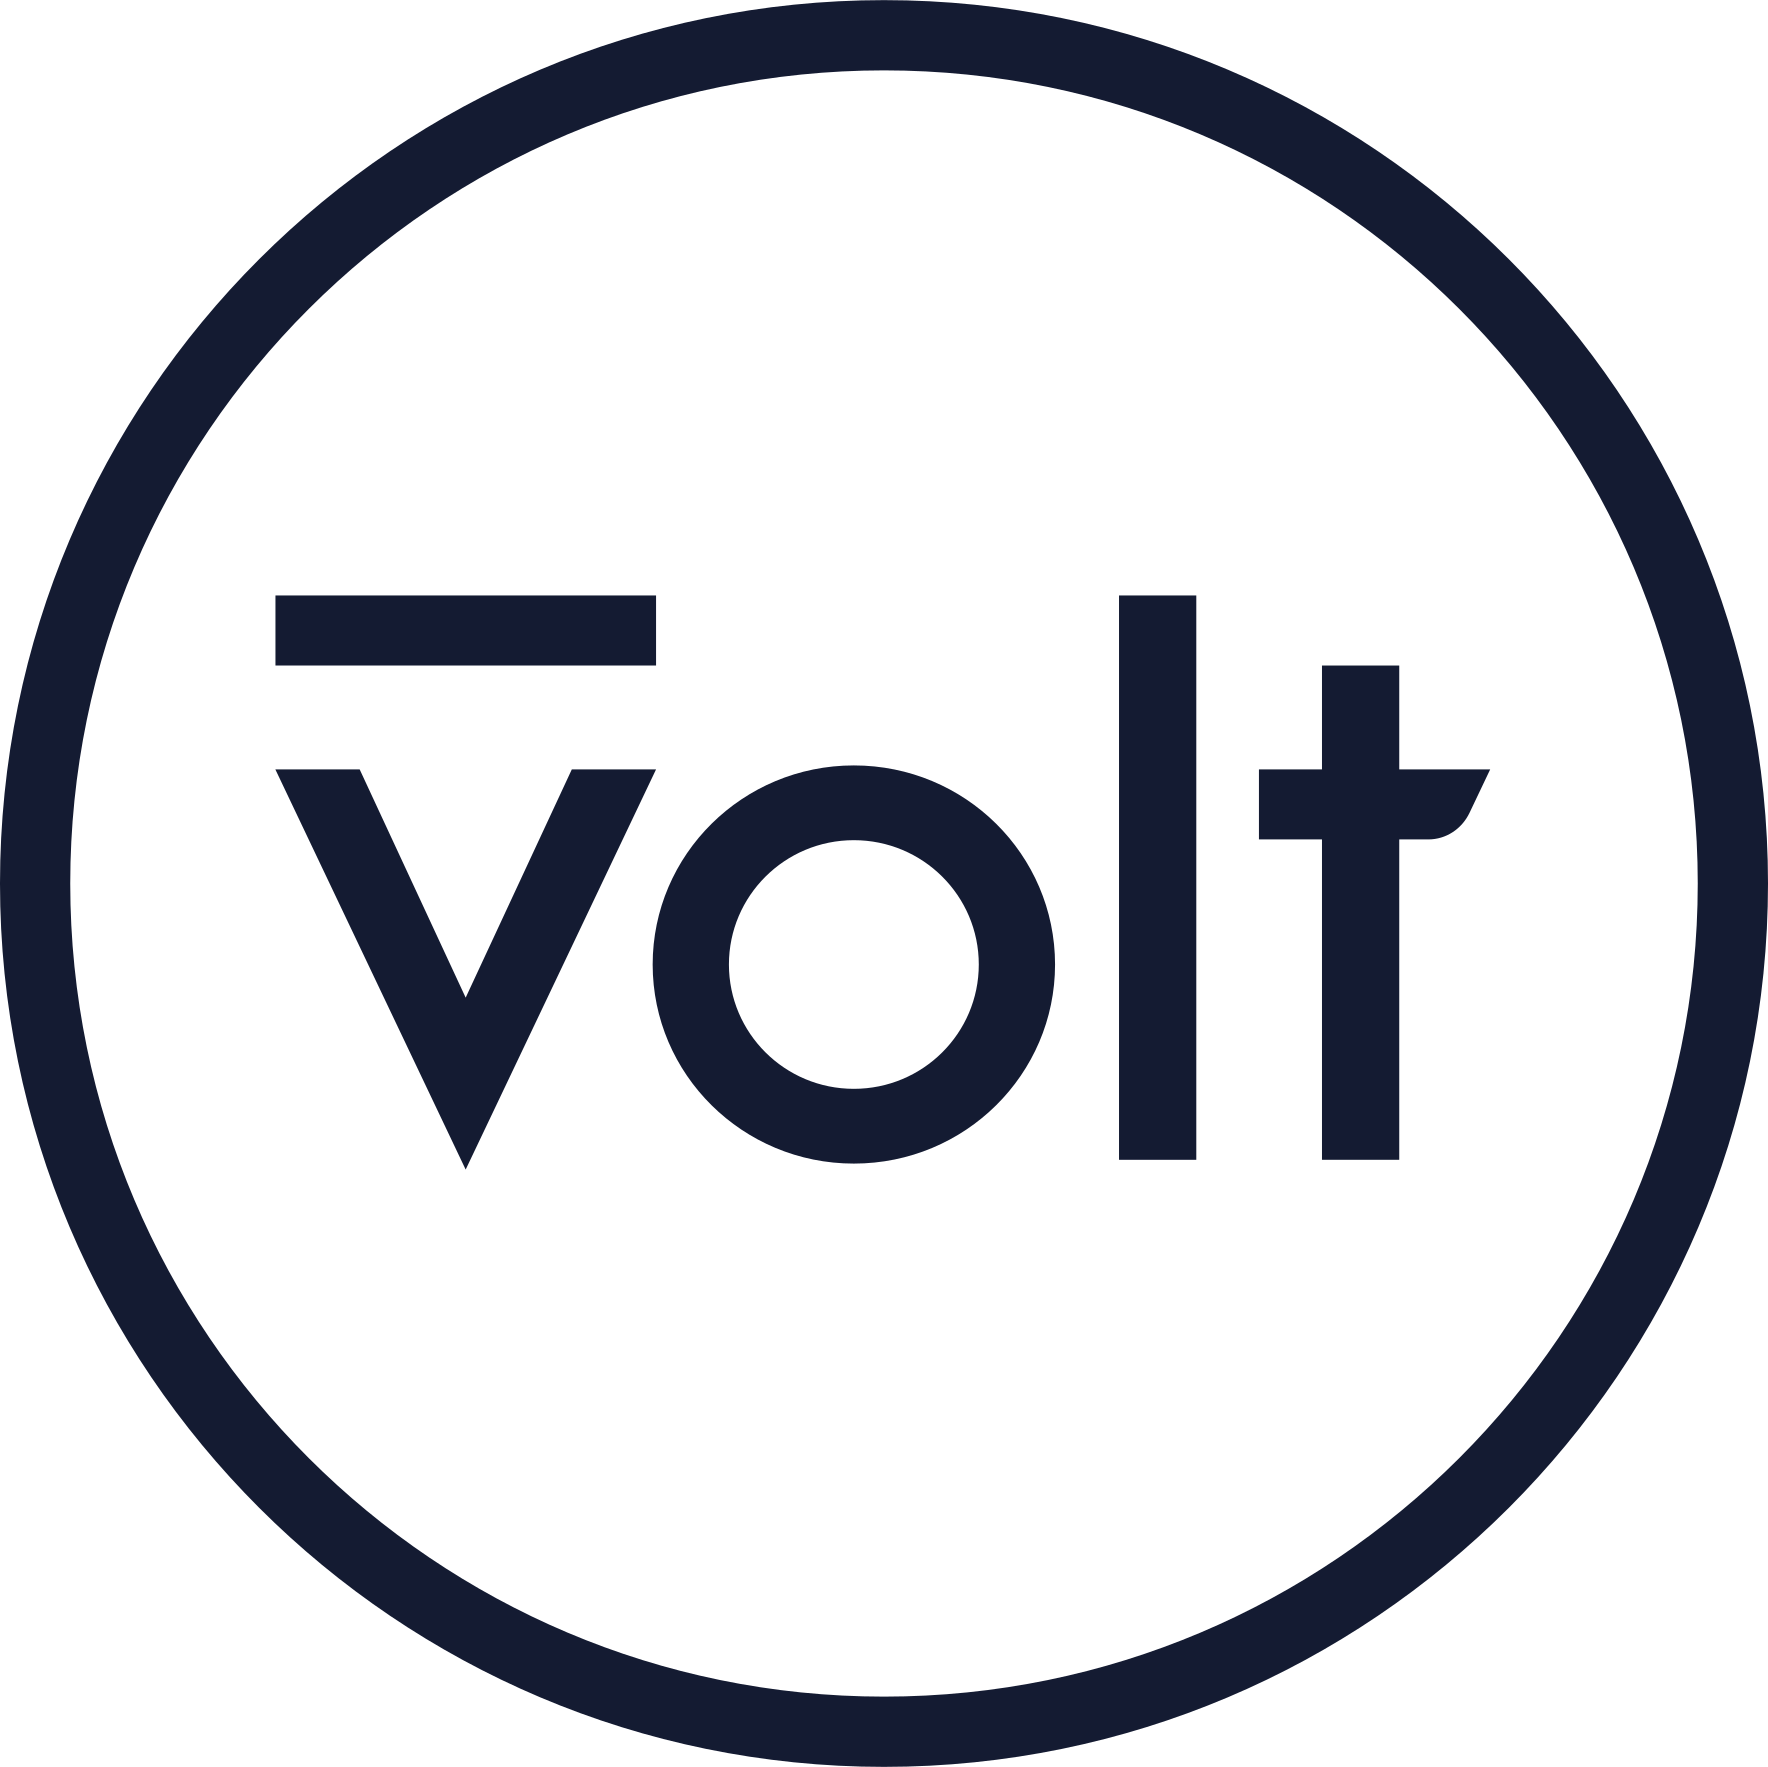 Volt: Real-time payments, everywhere